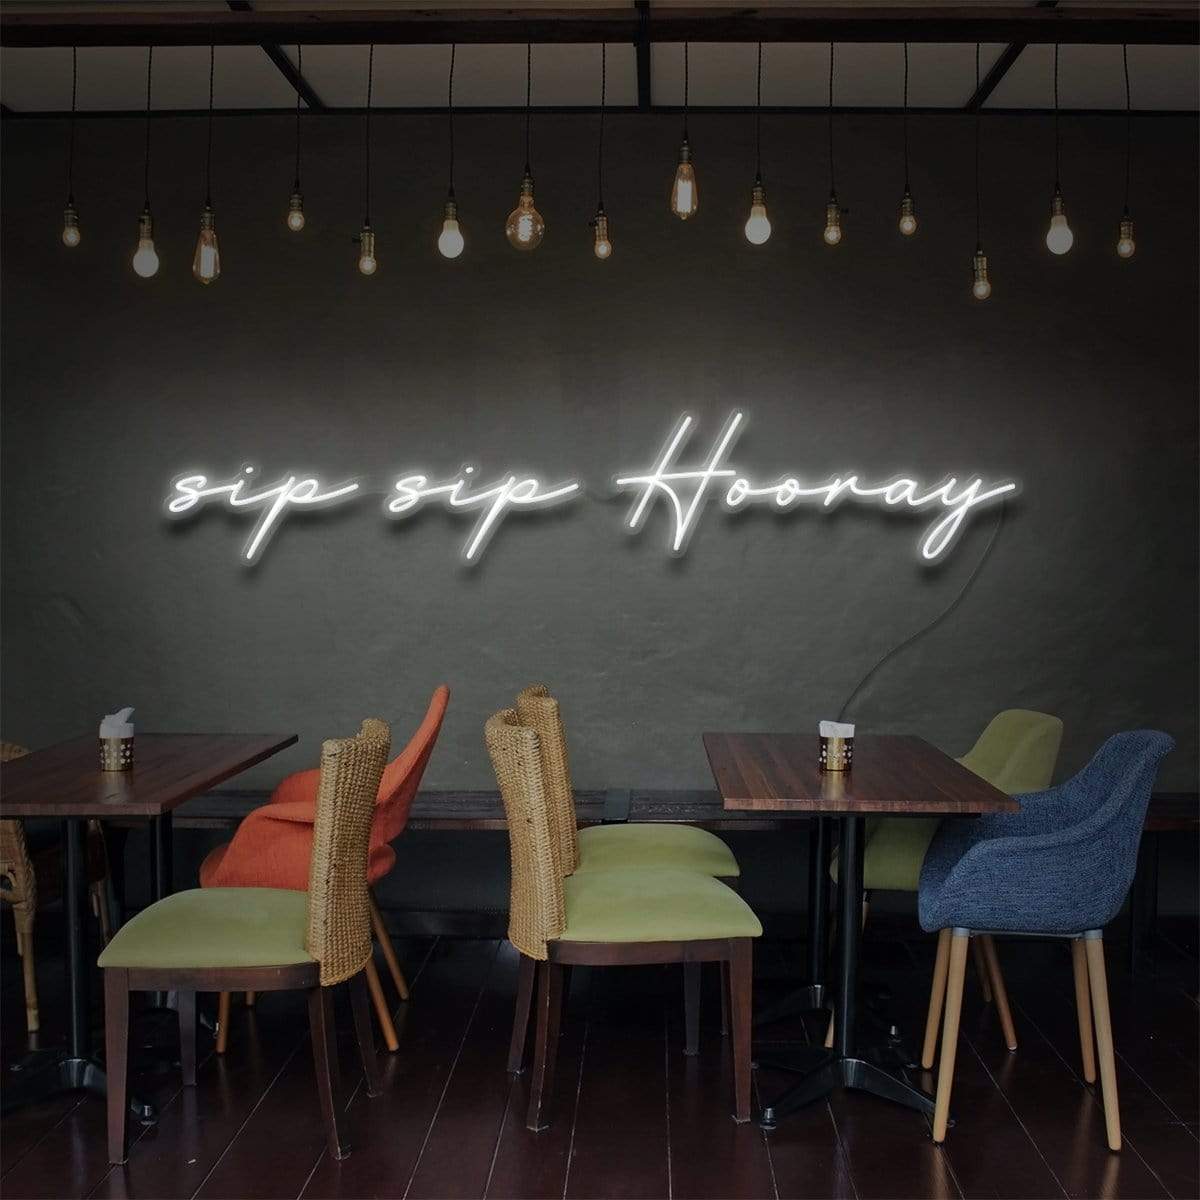 "Sip Sip Hooray" Neon Sign for Bars & Restaurants 90cm (3ft) / White / LED Neon by Neon Icons